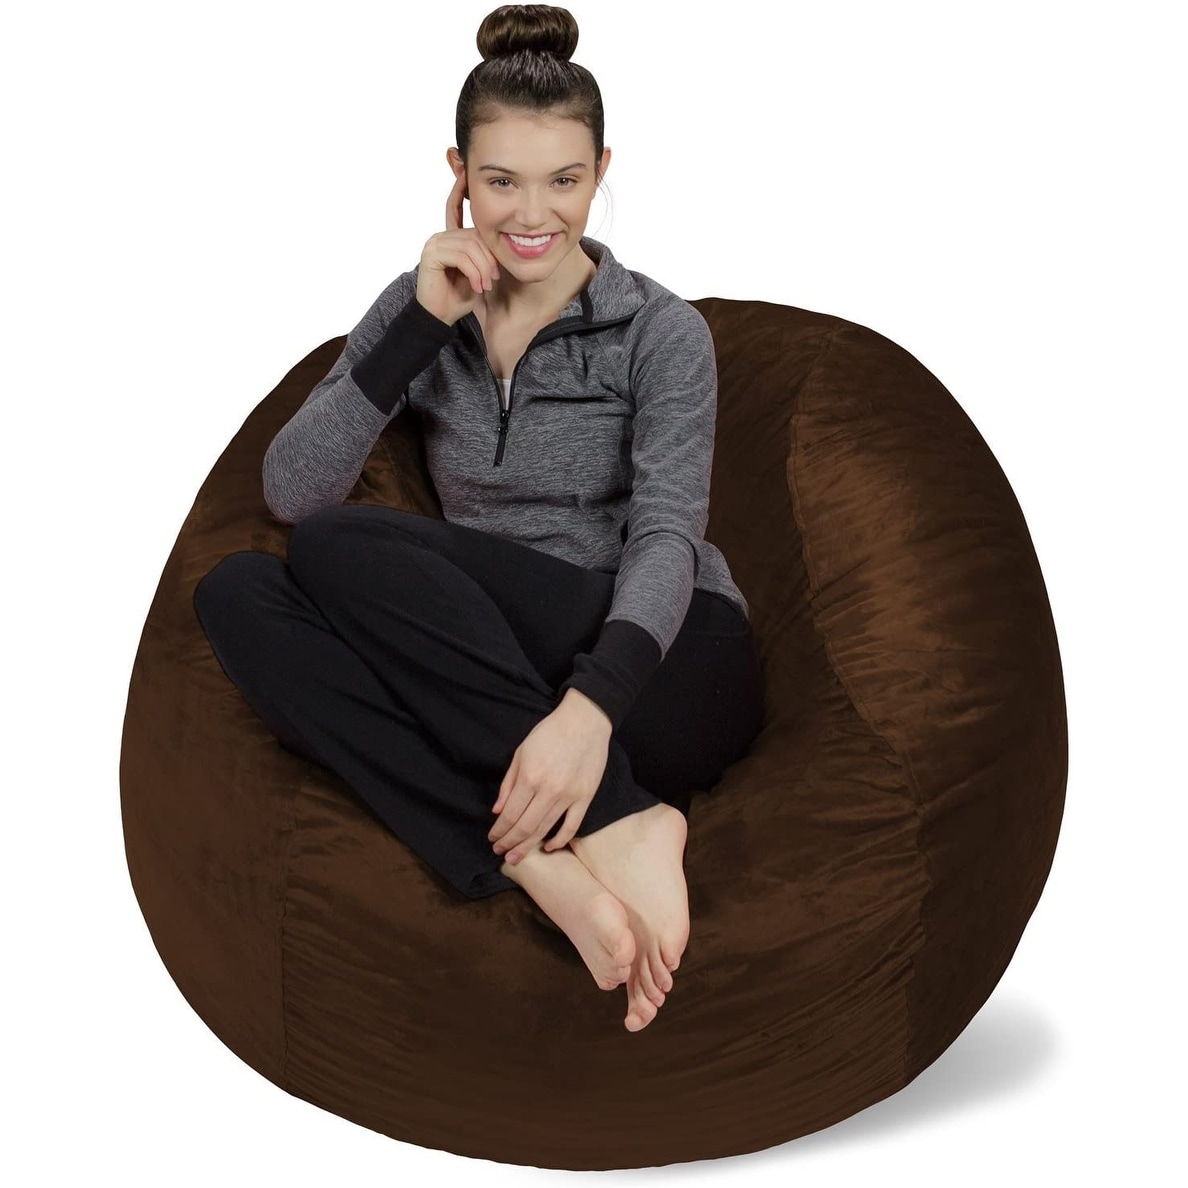 https://ak1.ostkcdn.com/images/products/is/images/direct/c426607e01b34c72bf7a0ef1ed91d24140239797/Sofa-Sack-Bean-Bag-Chair-4-ft.-Memory-Foam-Bean-Bag-Chair.jpg